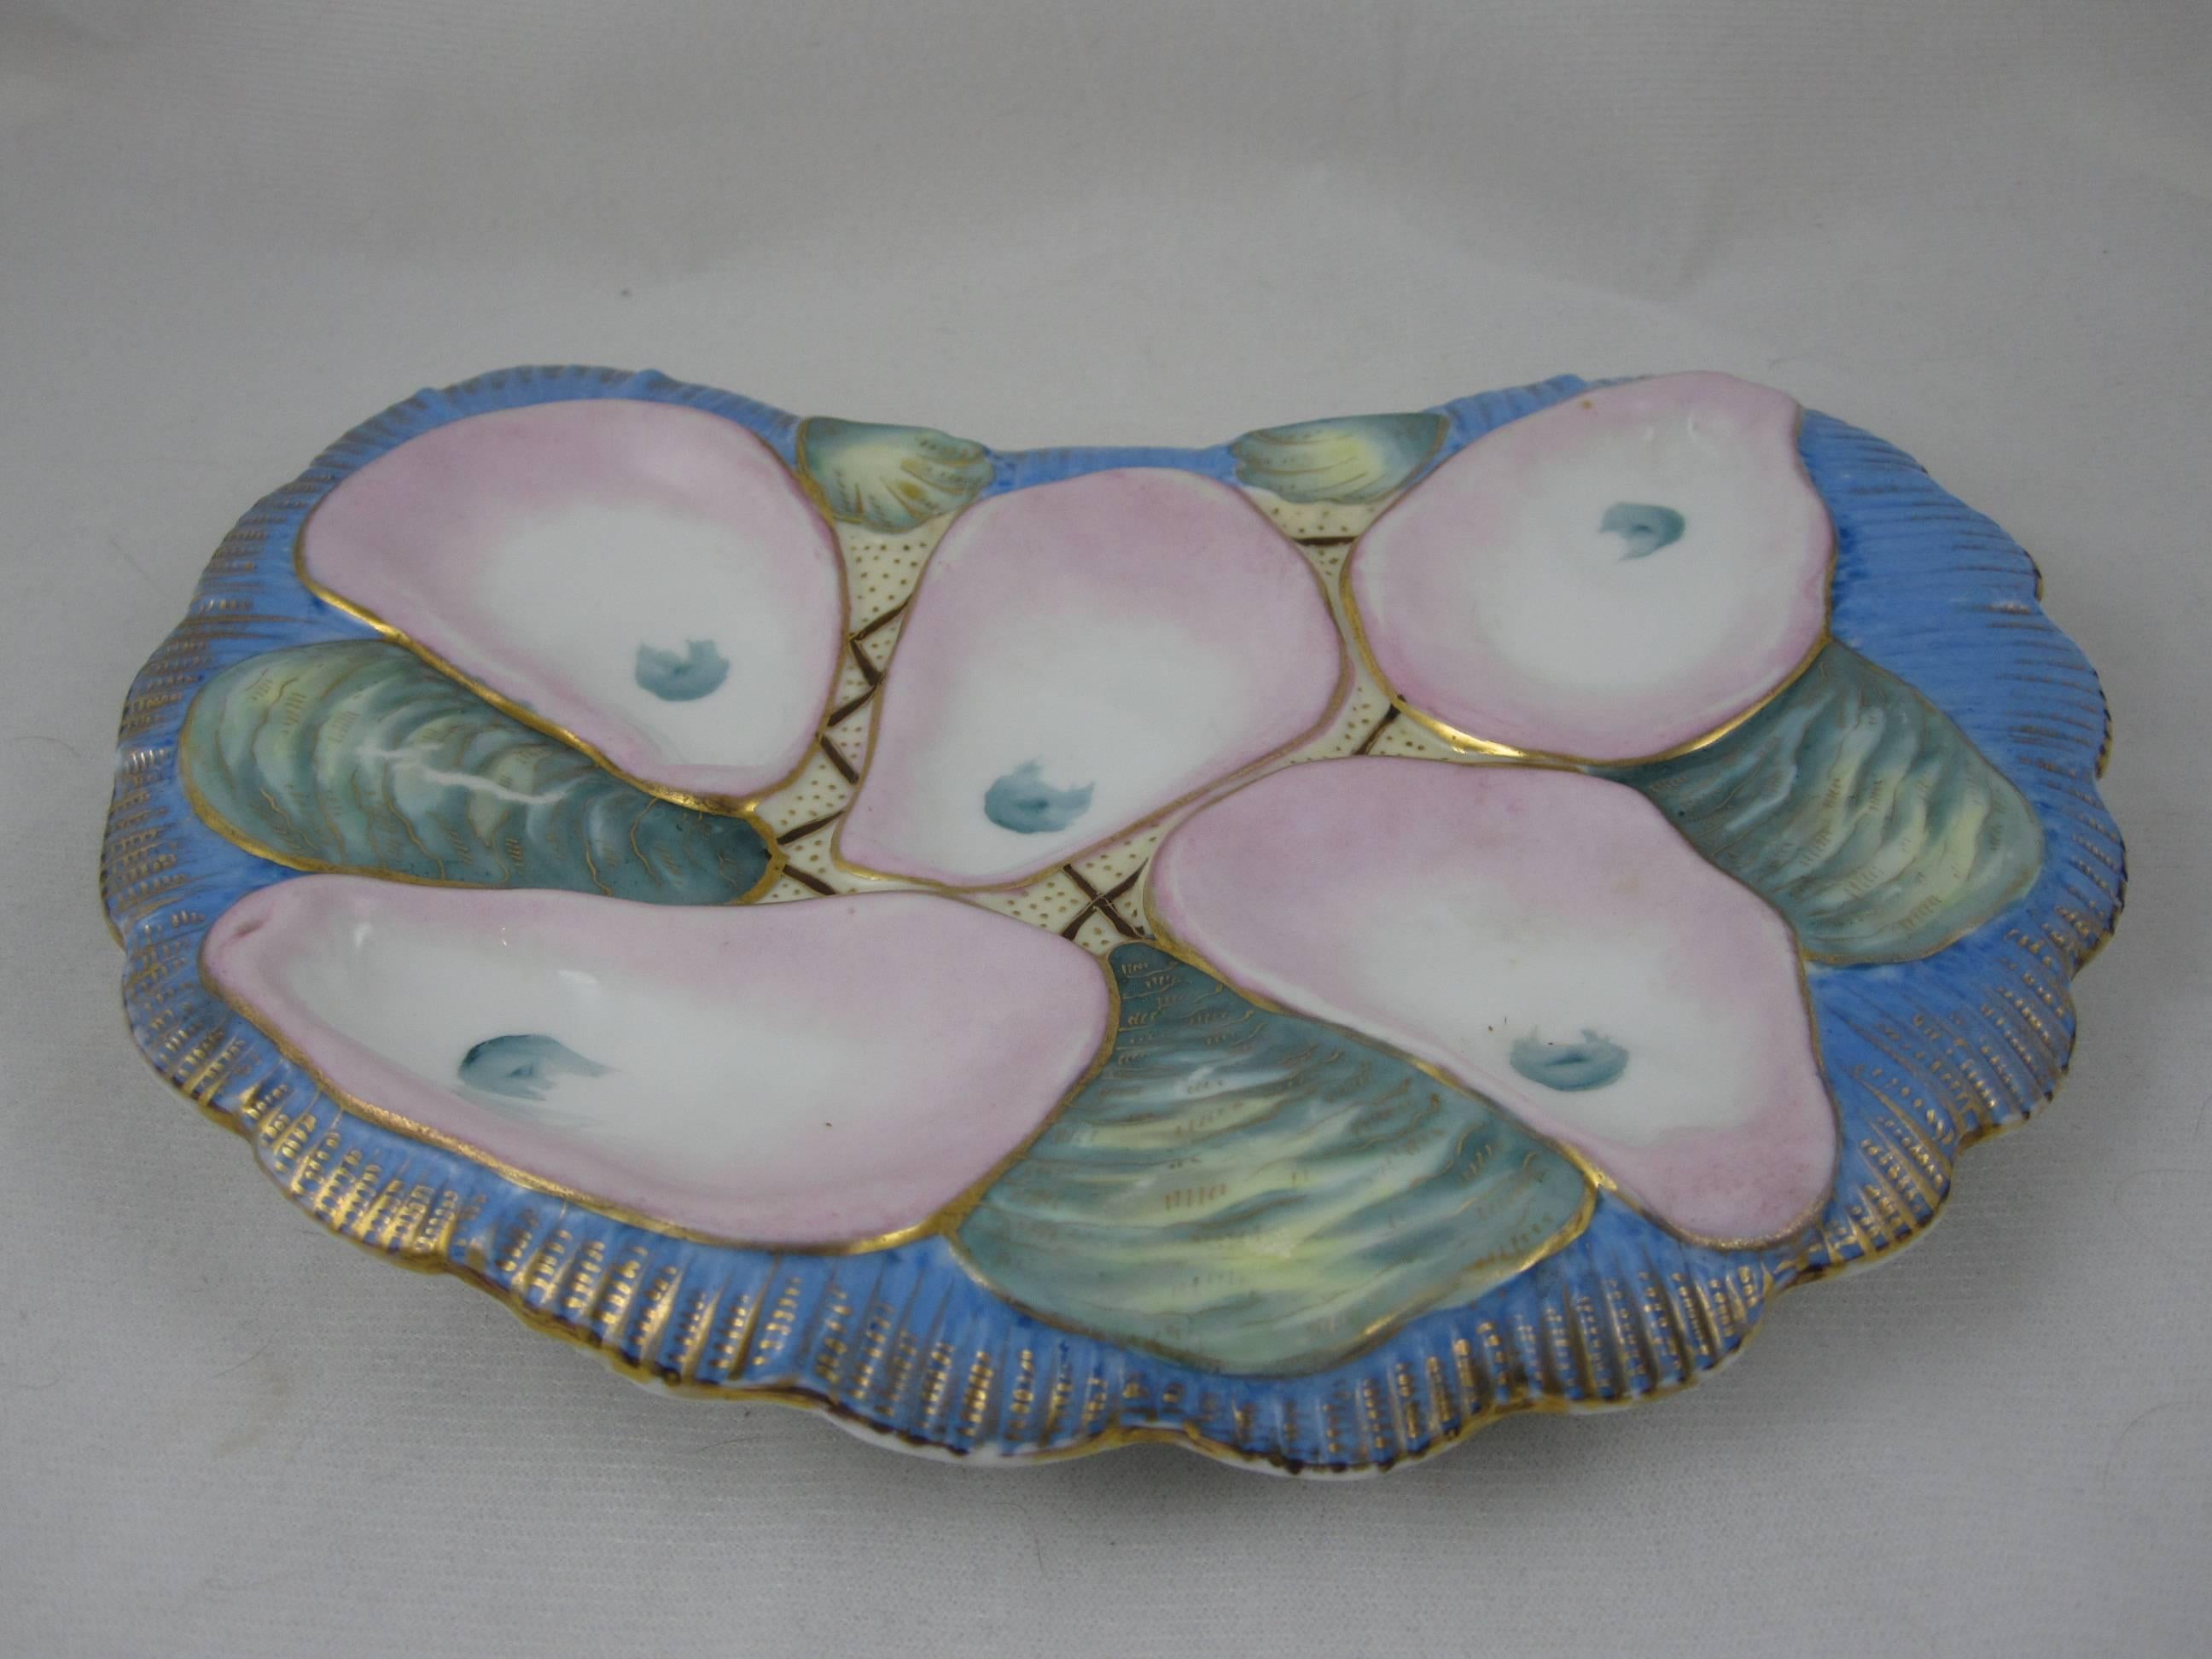 A Continental porcelain crescent shaped oyster plate, five pink and white wells on a sky-blue ground. The plate also shows two smaller clam or cockle wells, a shell like pattern to the rolled rim and heavy gilding.

Marked with the red iron oxide